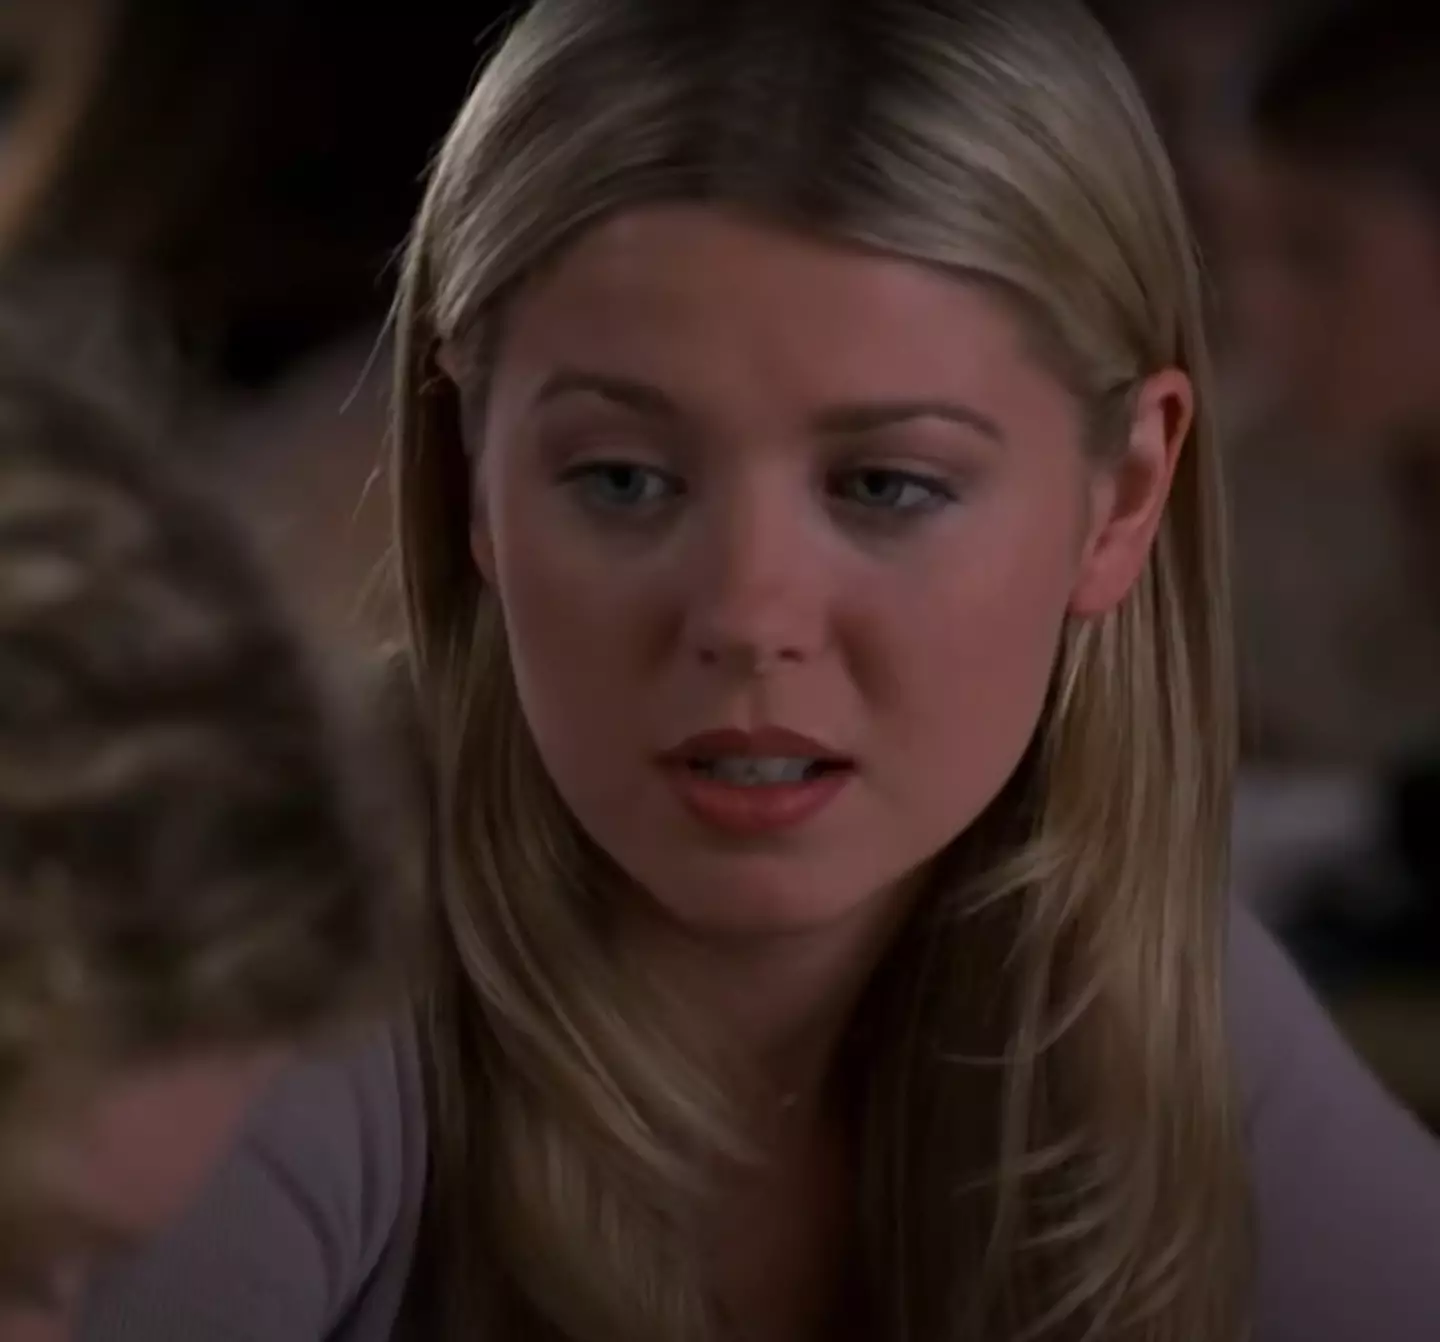 Tara Reid shot to fame with her role in American Pie.